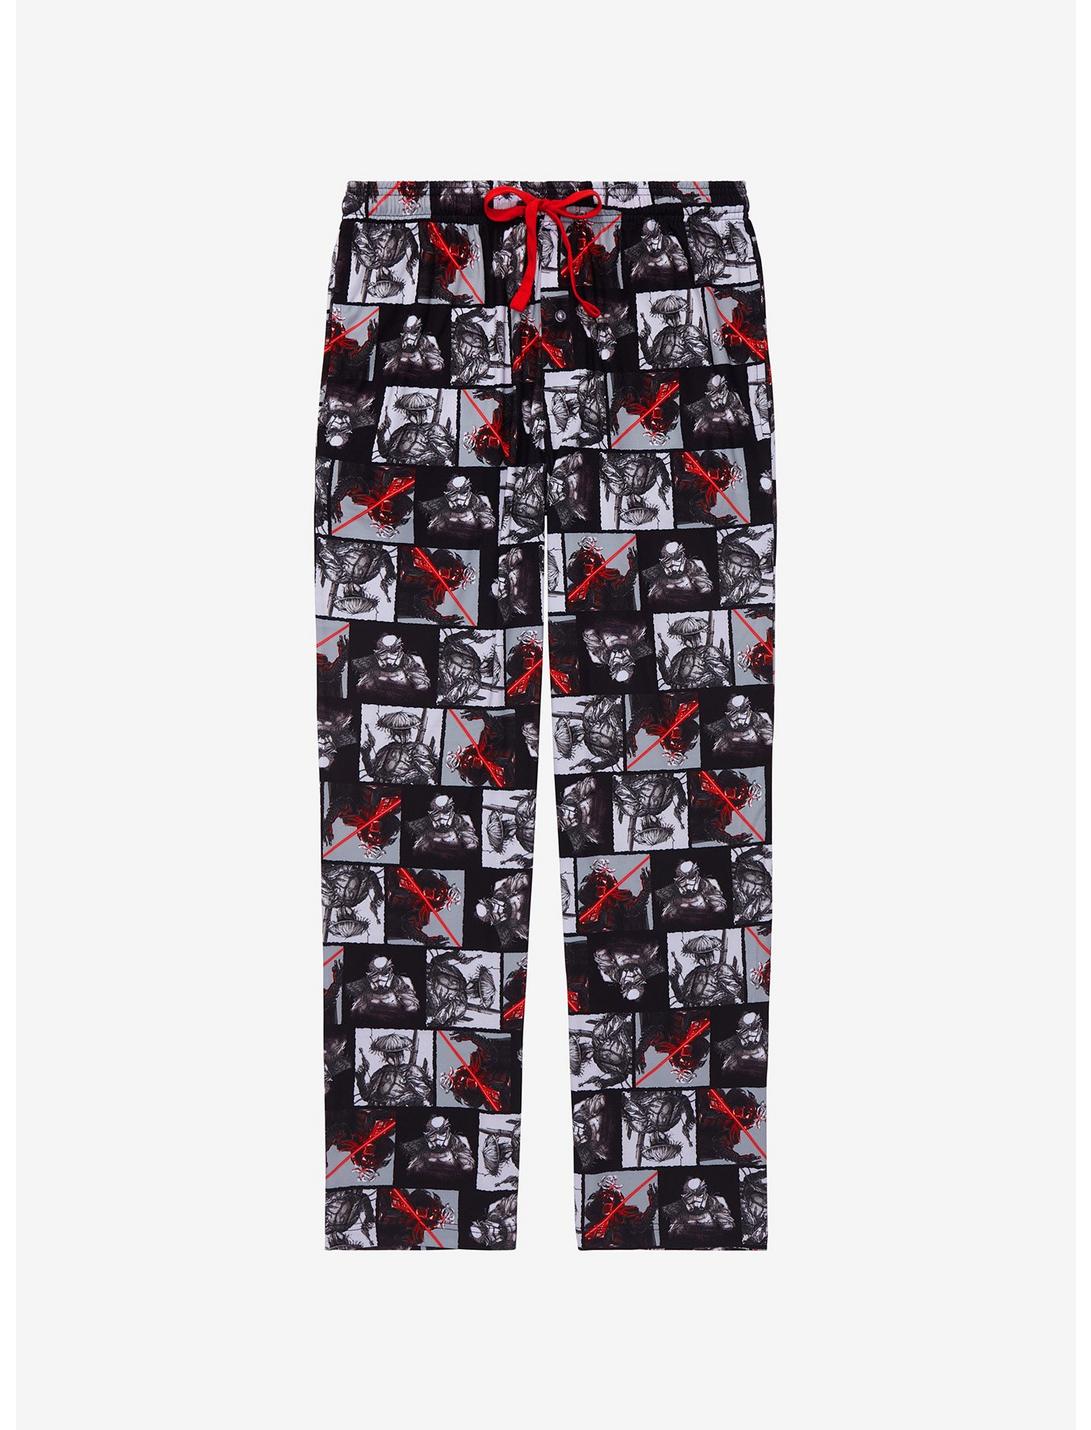 Star Wars Character Grid Allover Print Sleep Pants - BoxLunch Exclusive, MULTI, hi-res